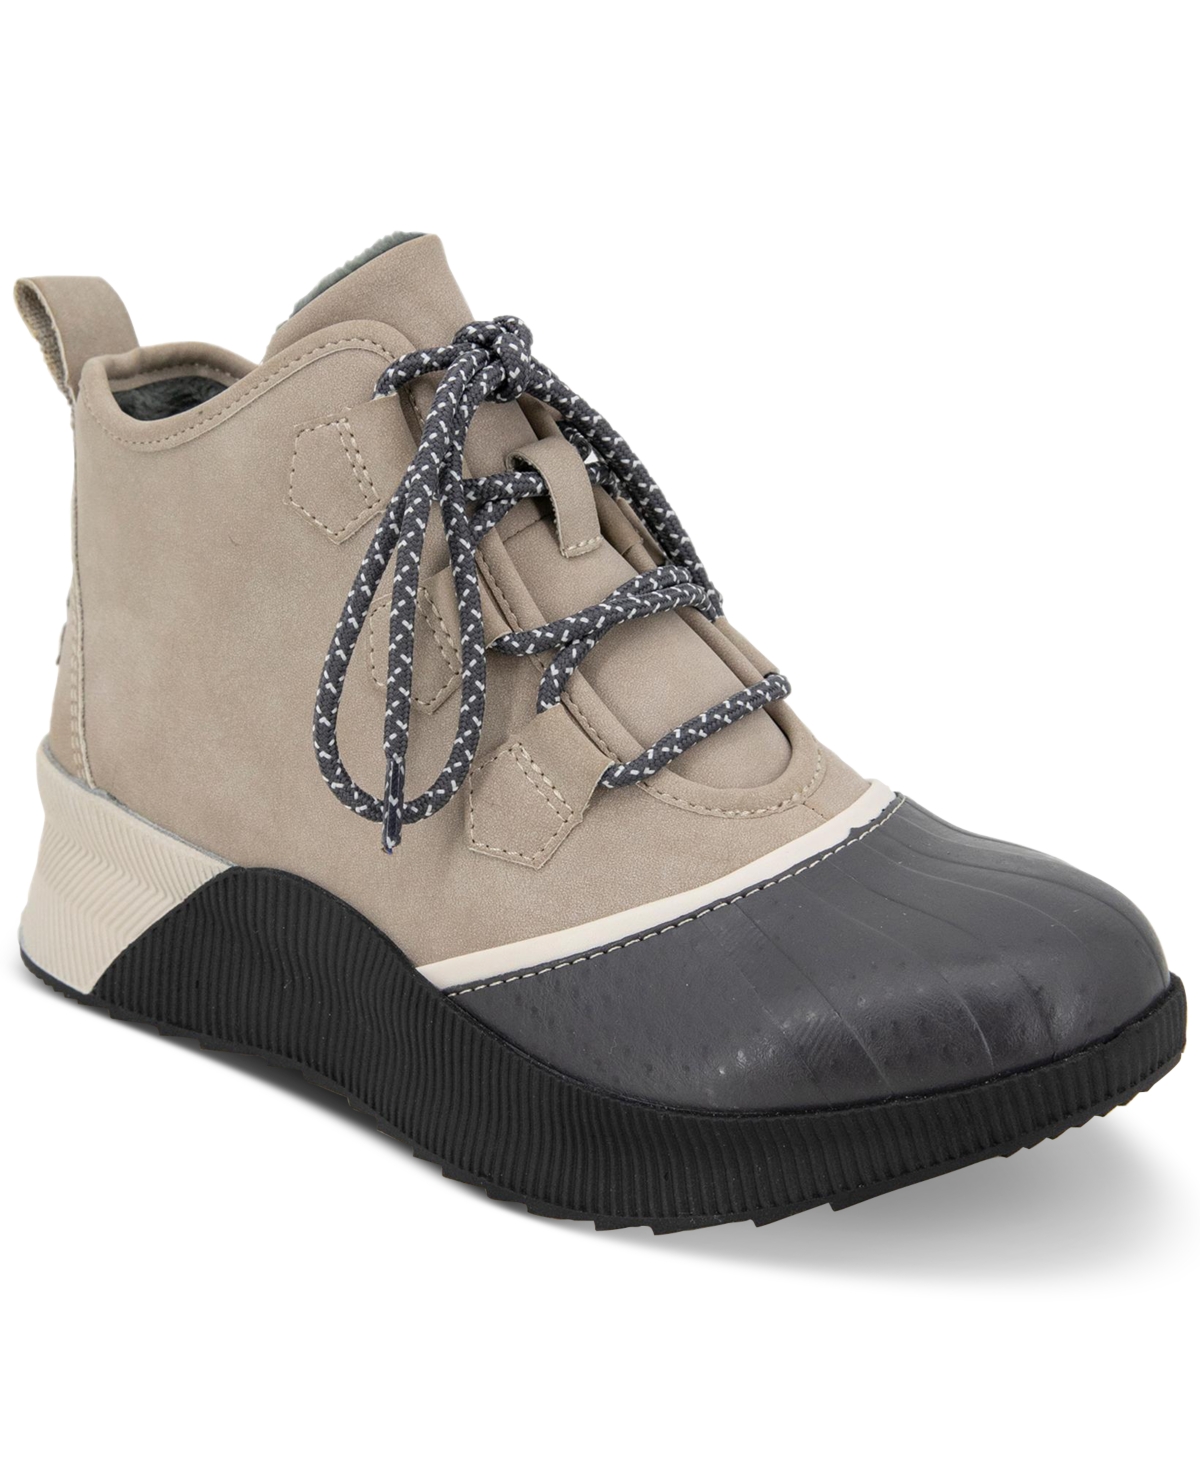 Women's Linette Lace-Up Water-Resistant Duck Booties - Taupe